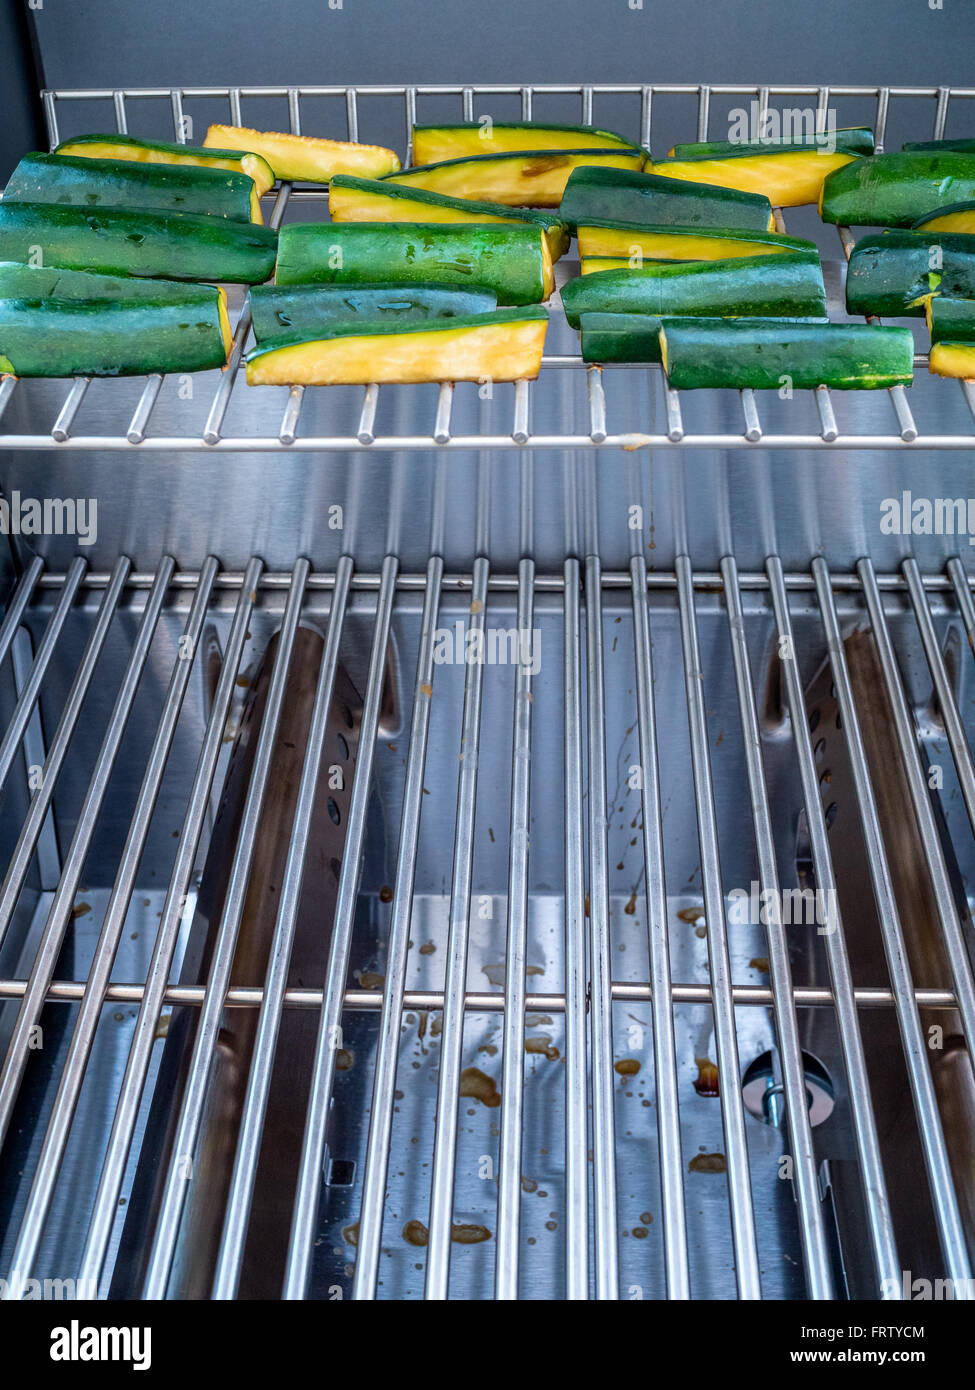 Green zucchini cooking on stainless steel bar b que Stock Photo